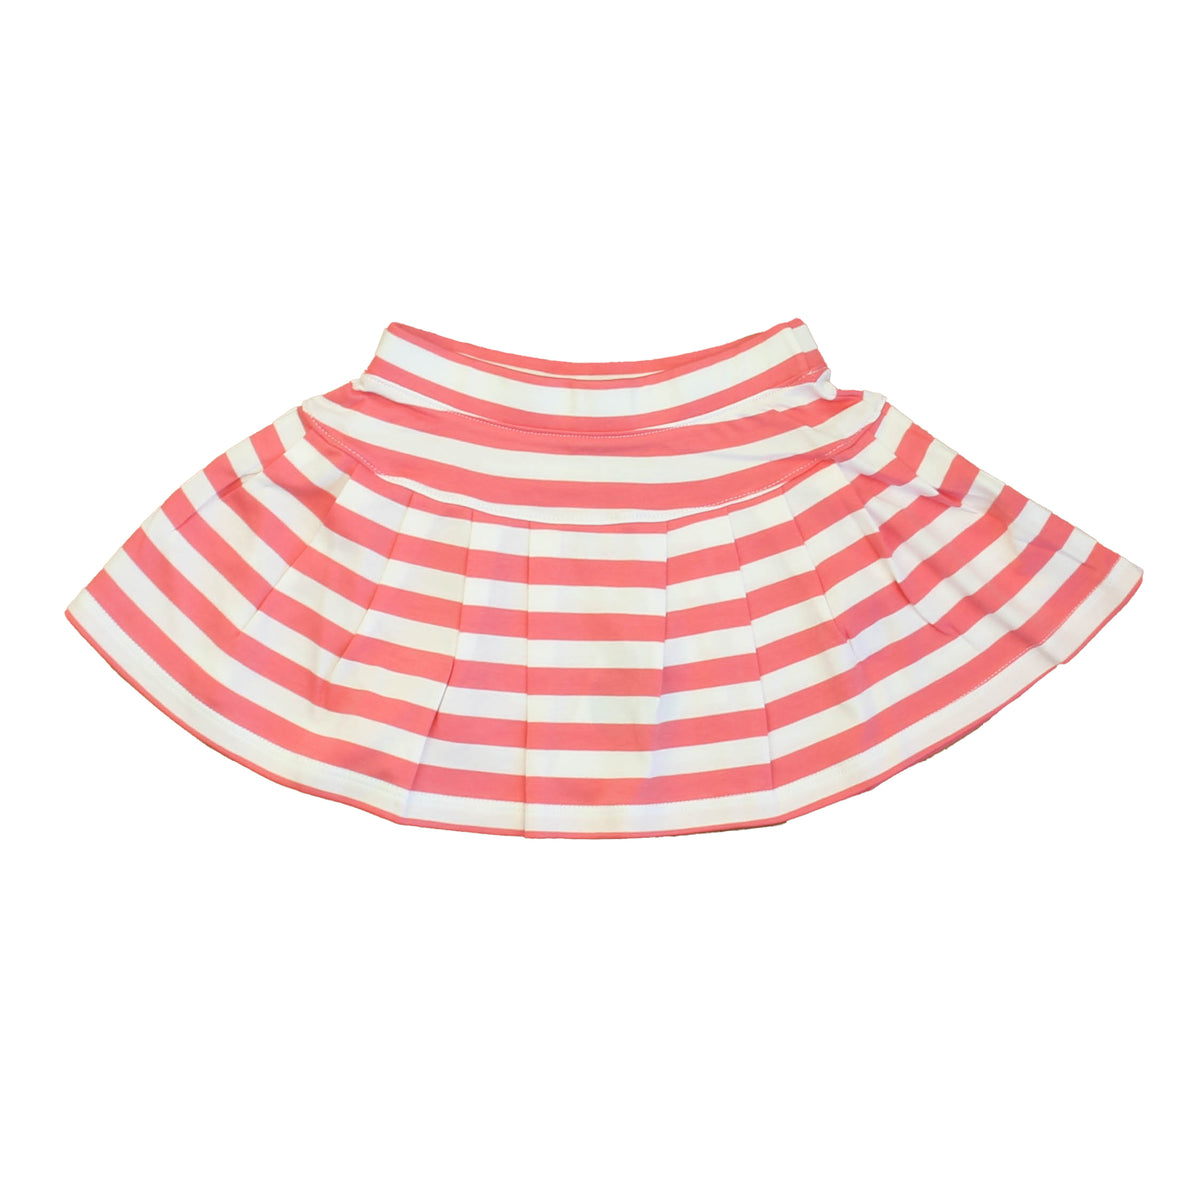 New with Tags: Sunkissed Coral | Bright White Stripe Skirt -- FINAL SALE